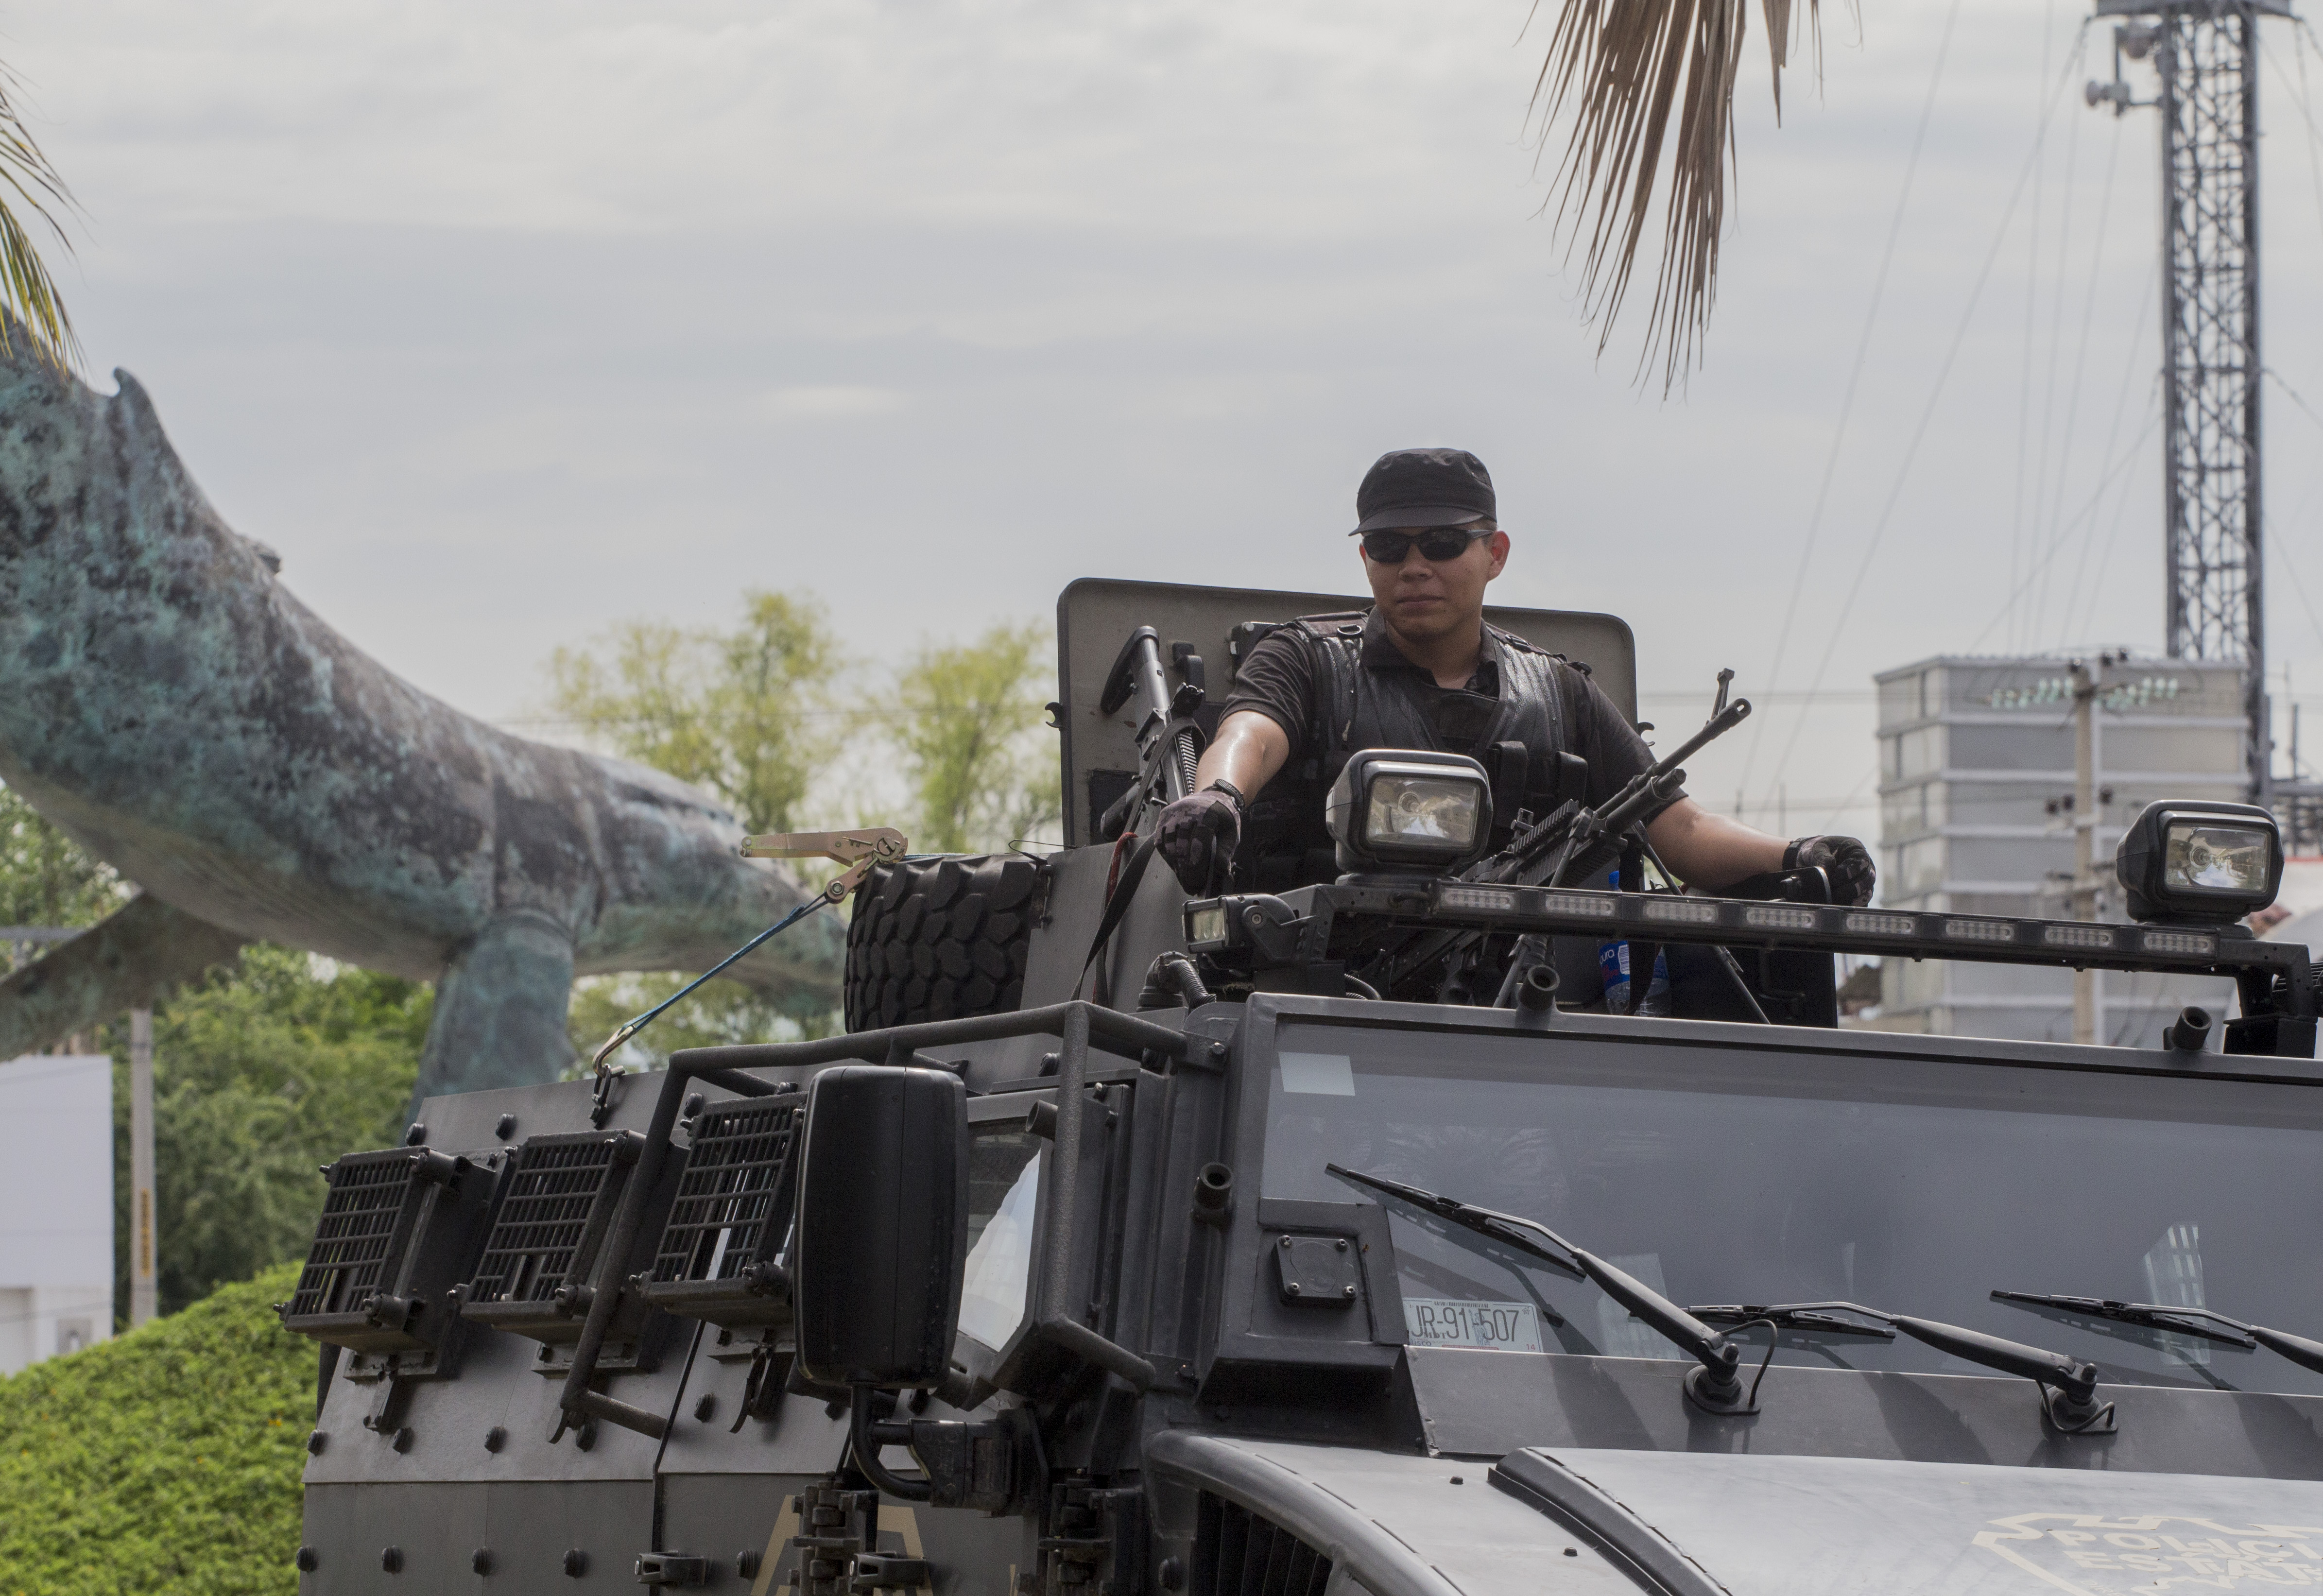 A state police officer patrols a street during a security operation in Puerto Vallarta in the western Mexican state of Jalisco on August 18, 2016.  Jesus Alfredo Guzman Salazar, the son of drug lord Joaquin "El Chapo" Guzman, was among a group kidnapped from a bar in the Mexican resort city of Puerto Vallarta, authorities confirmed Tuesday. Seven gunmen in pickup trucks swooped down on the upscale bar and restaurant Monday around dawn and abducted the victims. Investigators said it was likely part of a settling of scores between rival drug cartels. / AFP PHOTO / HECTOR GUERRERO